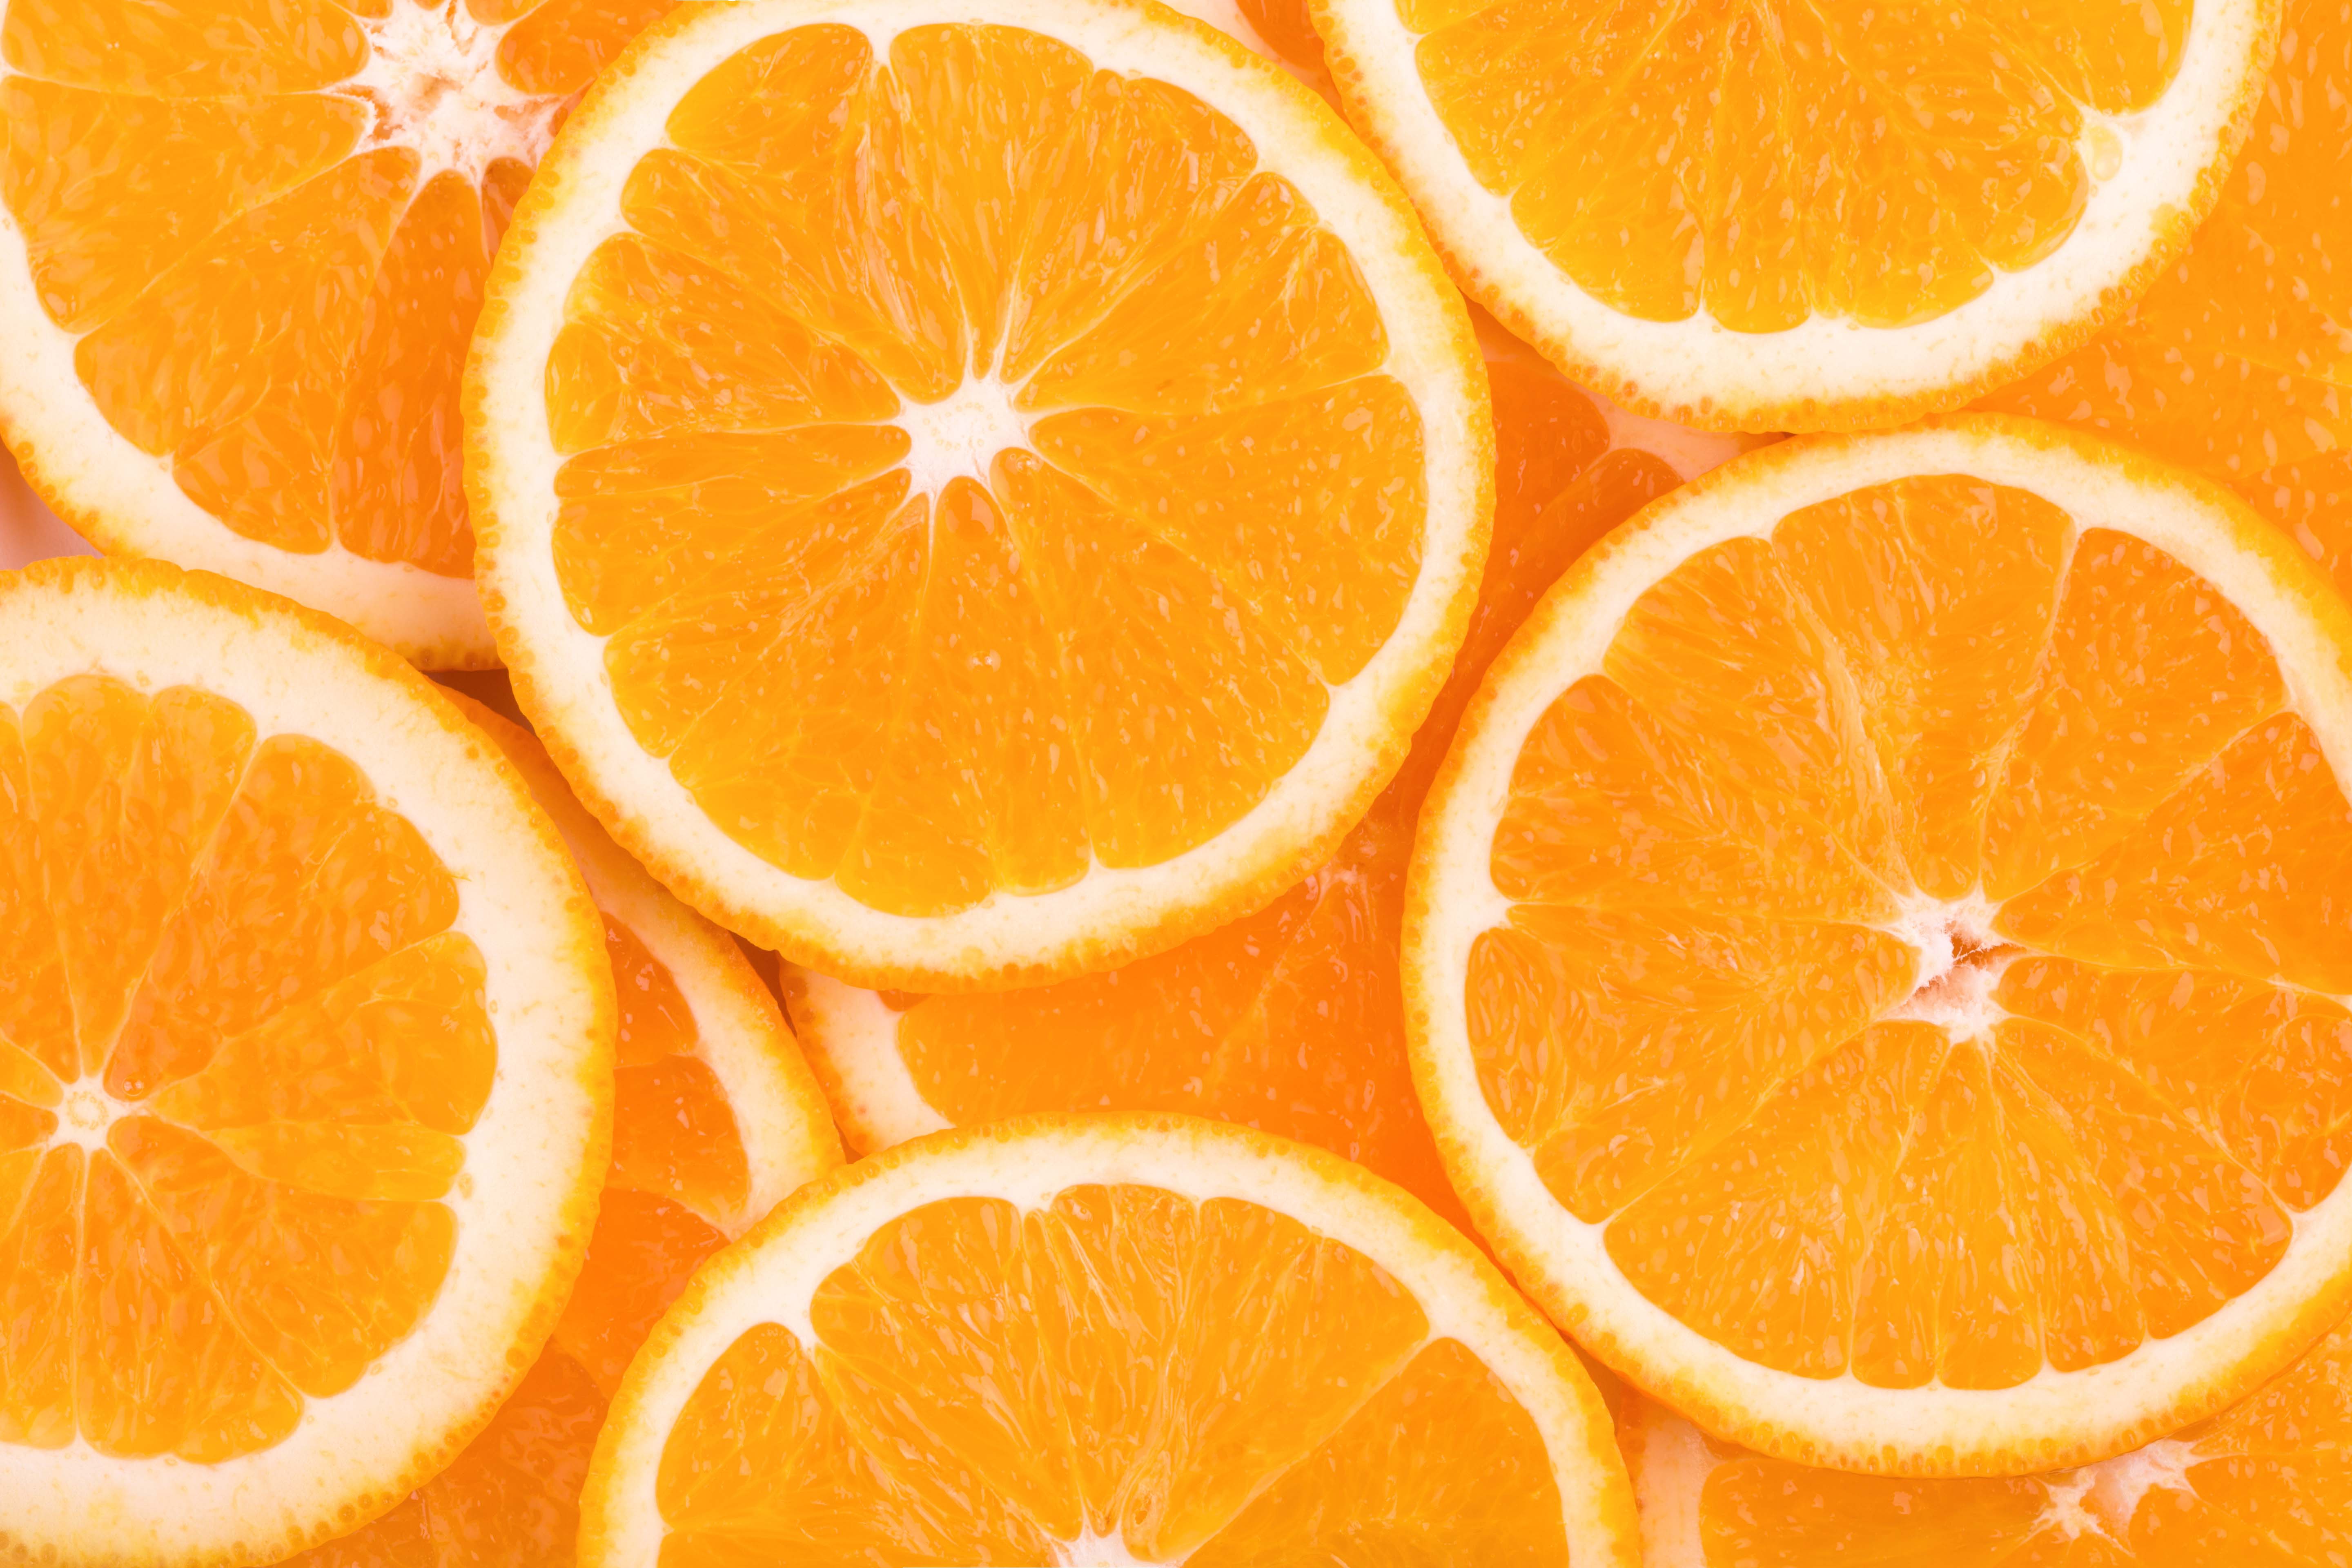 Citrus Cleaner 102: Orange is the New Cleaner